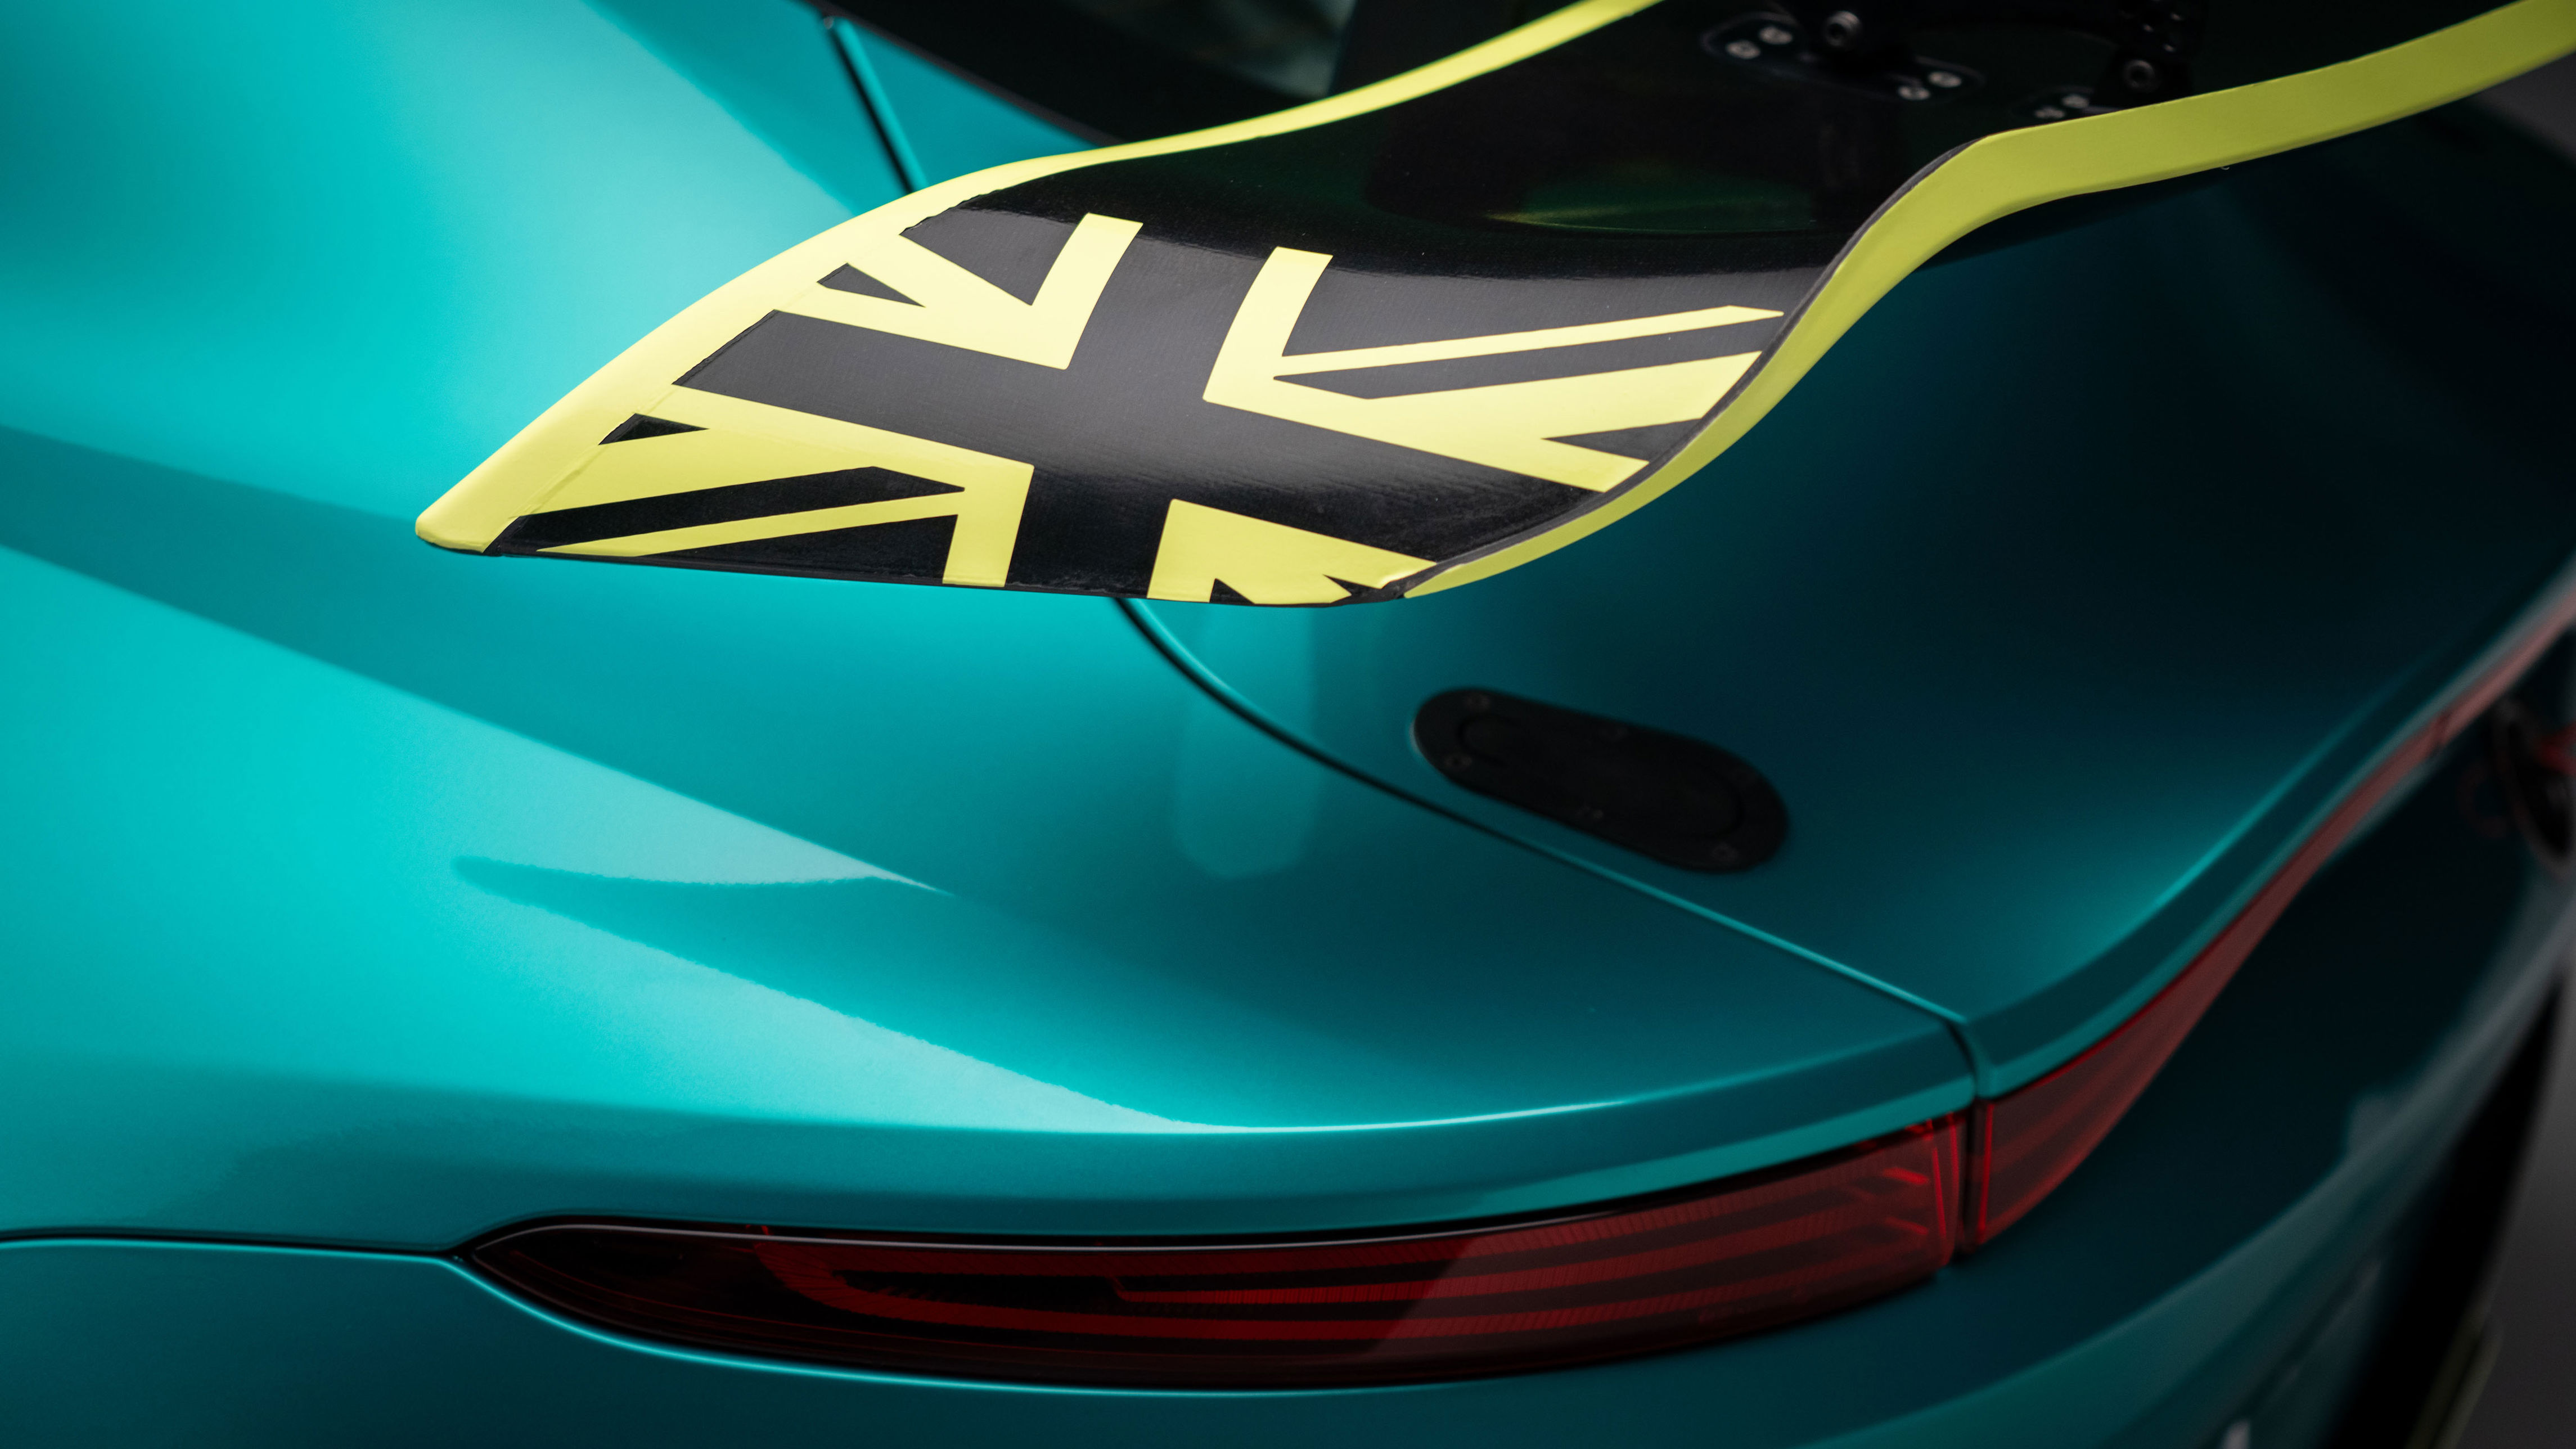 aston martin gt4 racer revealed: lighter and less powerful than the road car